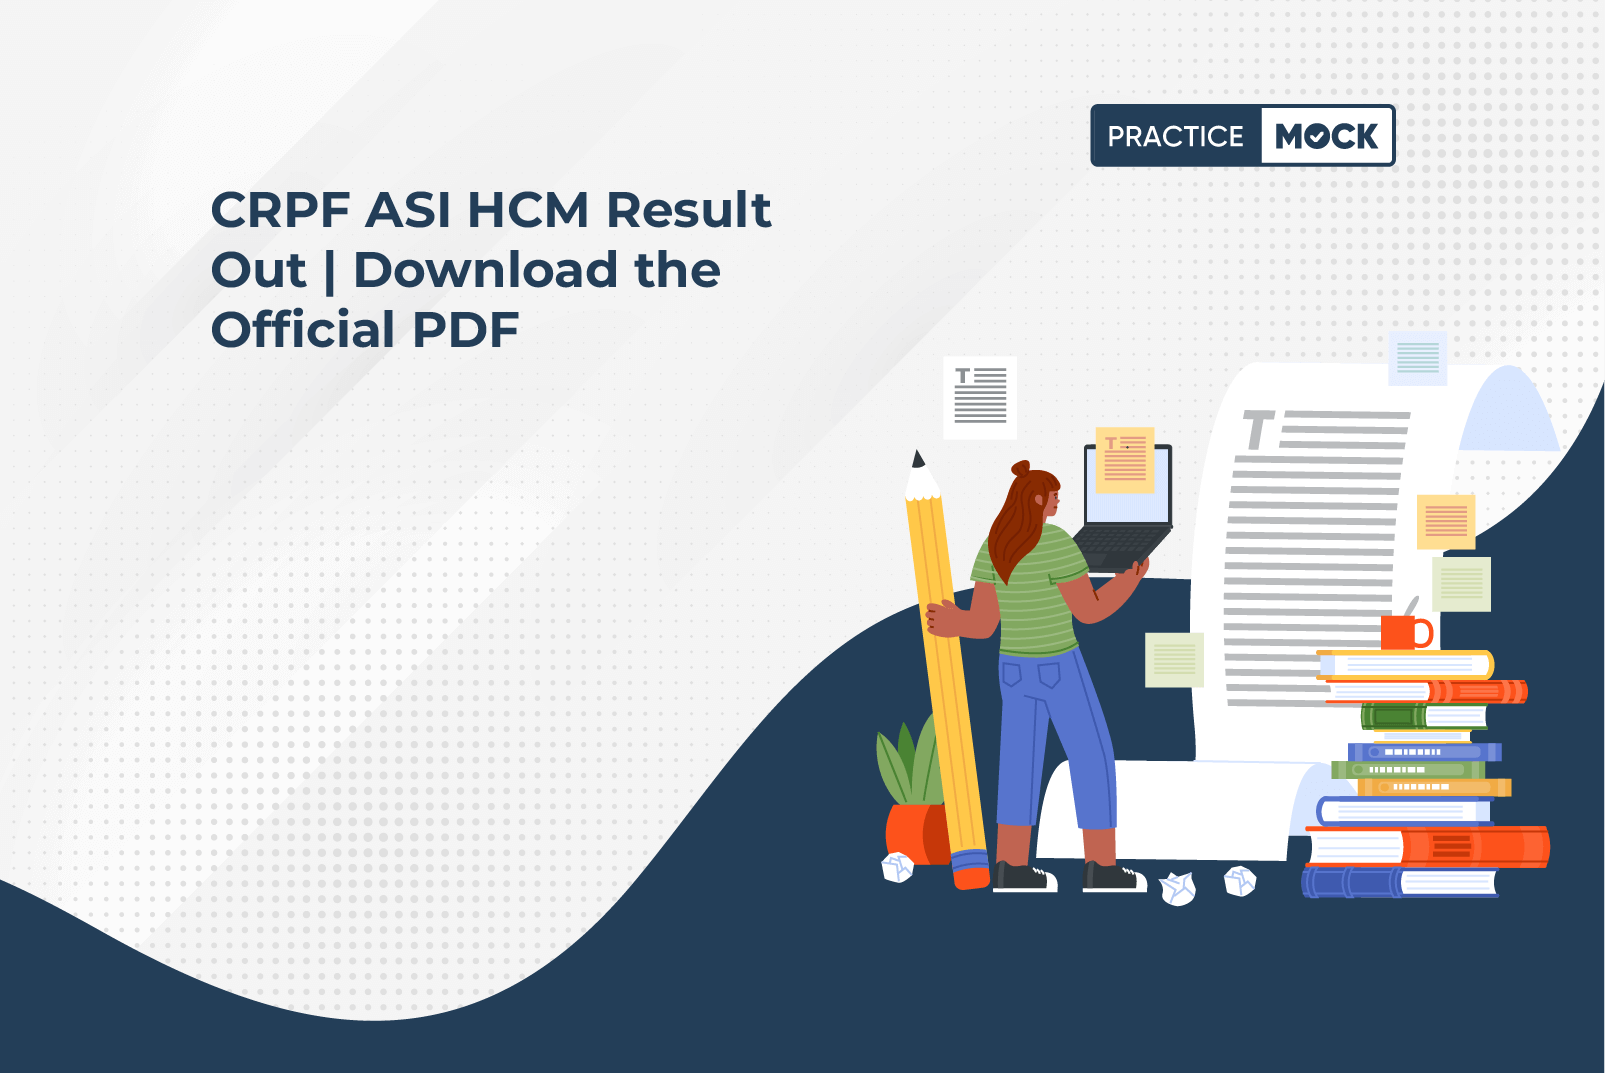 CRPF ASI HCM Result Out Download the Official PDF (1)